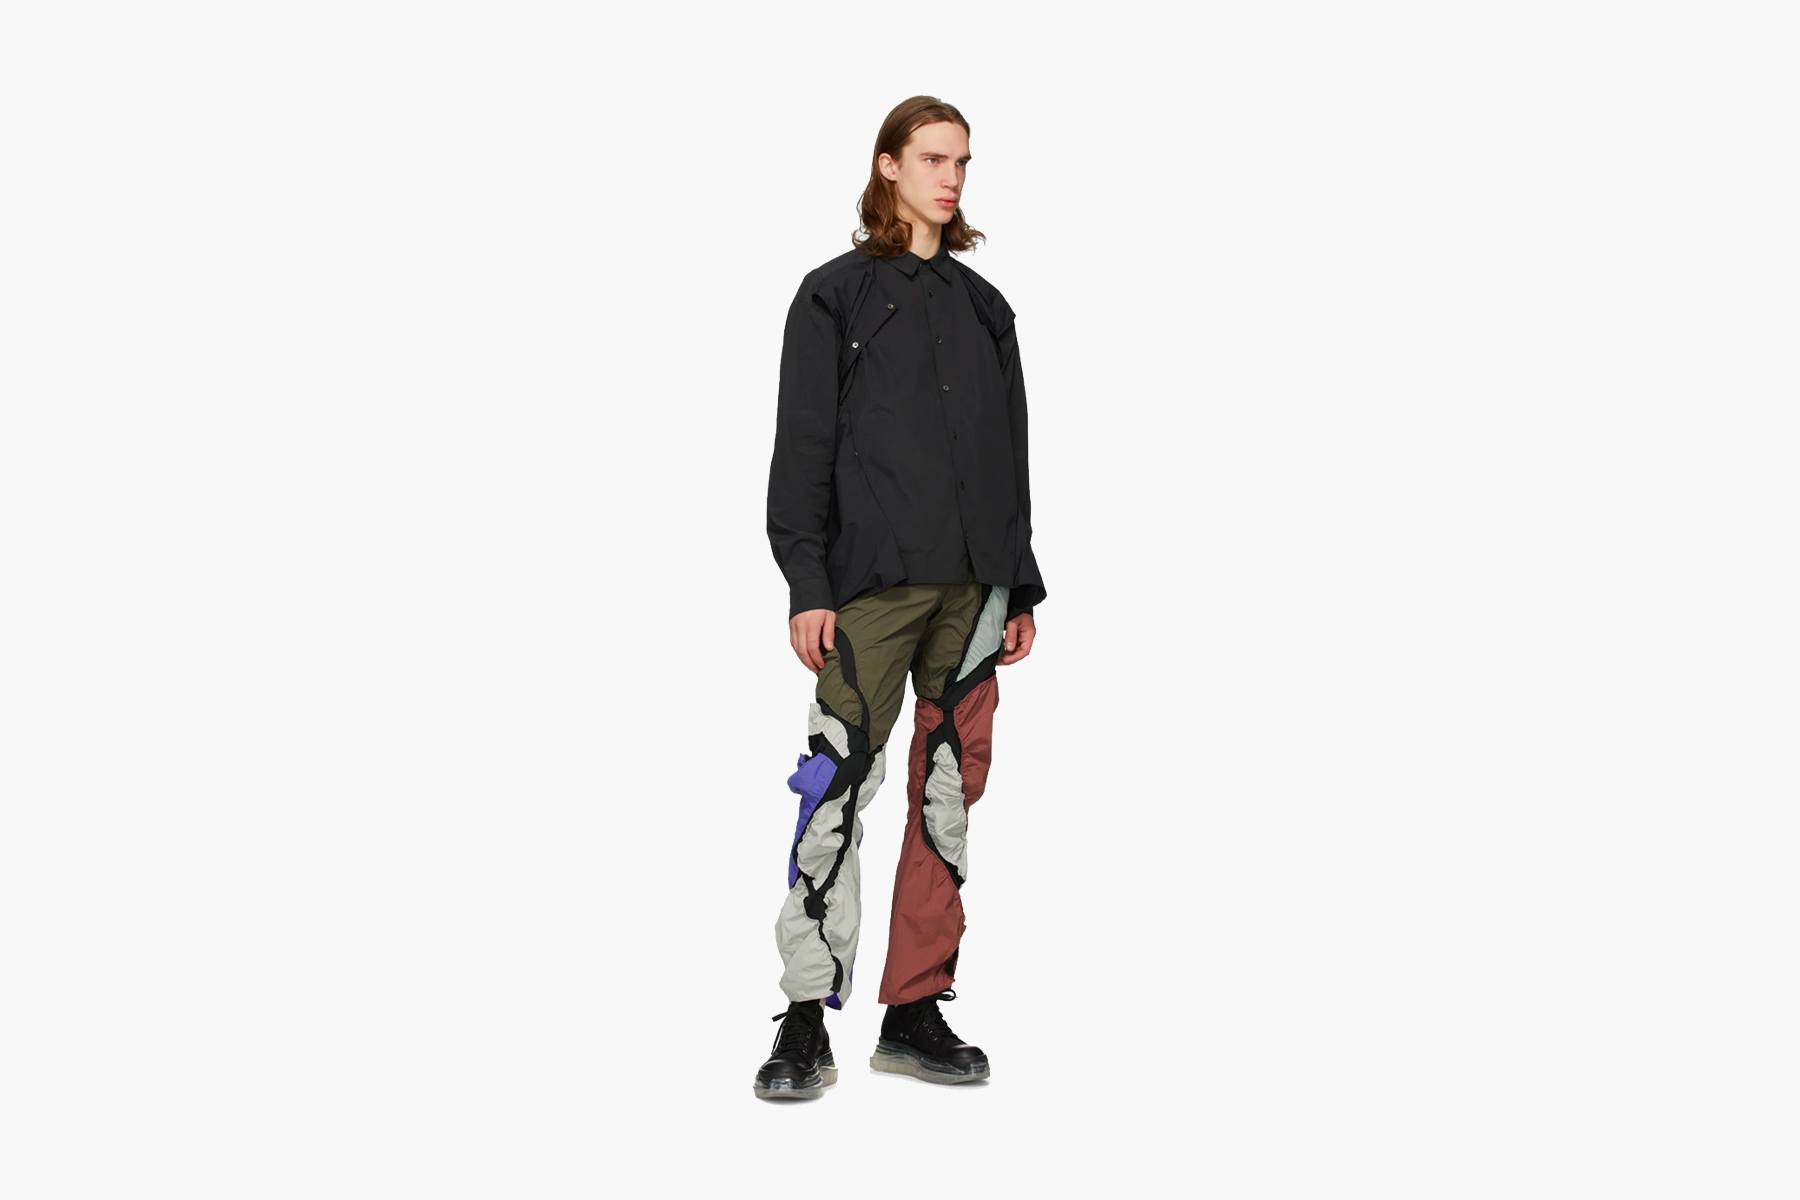 Post Archive Faction Multicolor 3.0 Left Trousers Release | Hypebeast